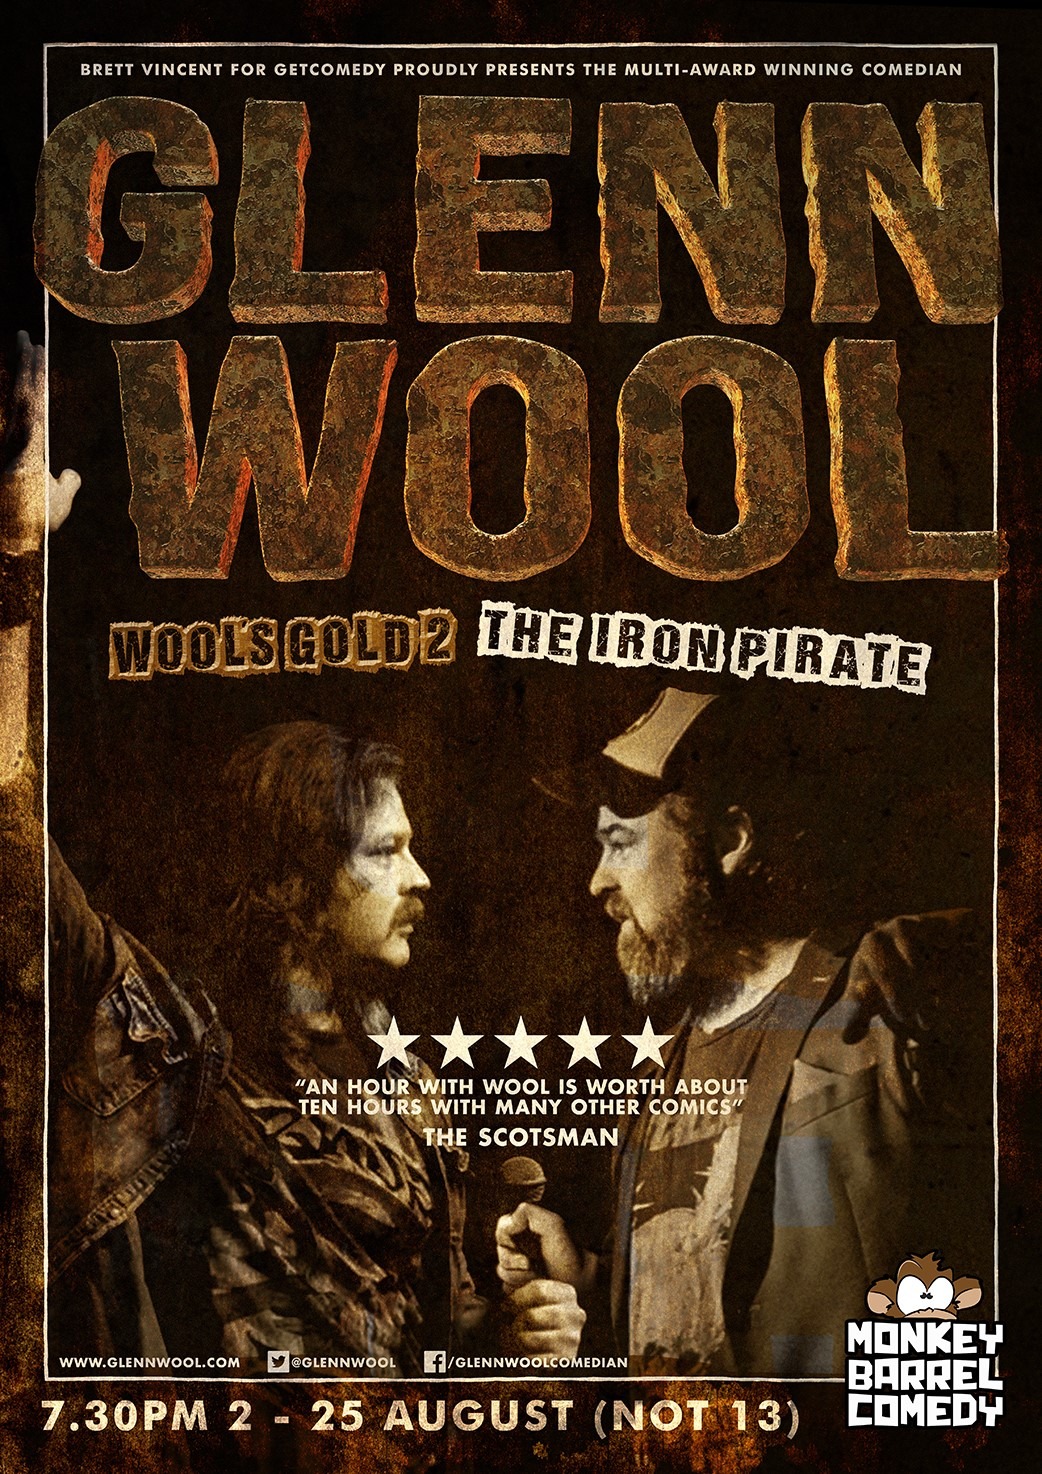 The poster for Glenn Wool: Wool's Gold II (The Iron Pirate)